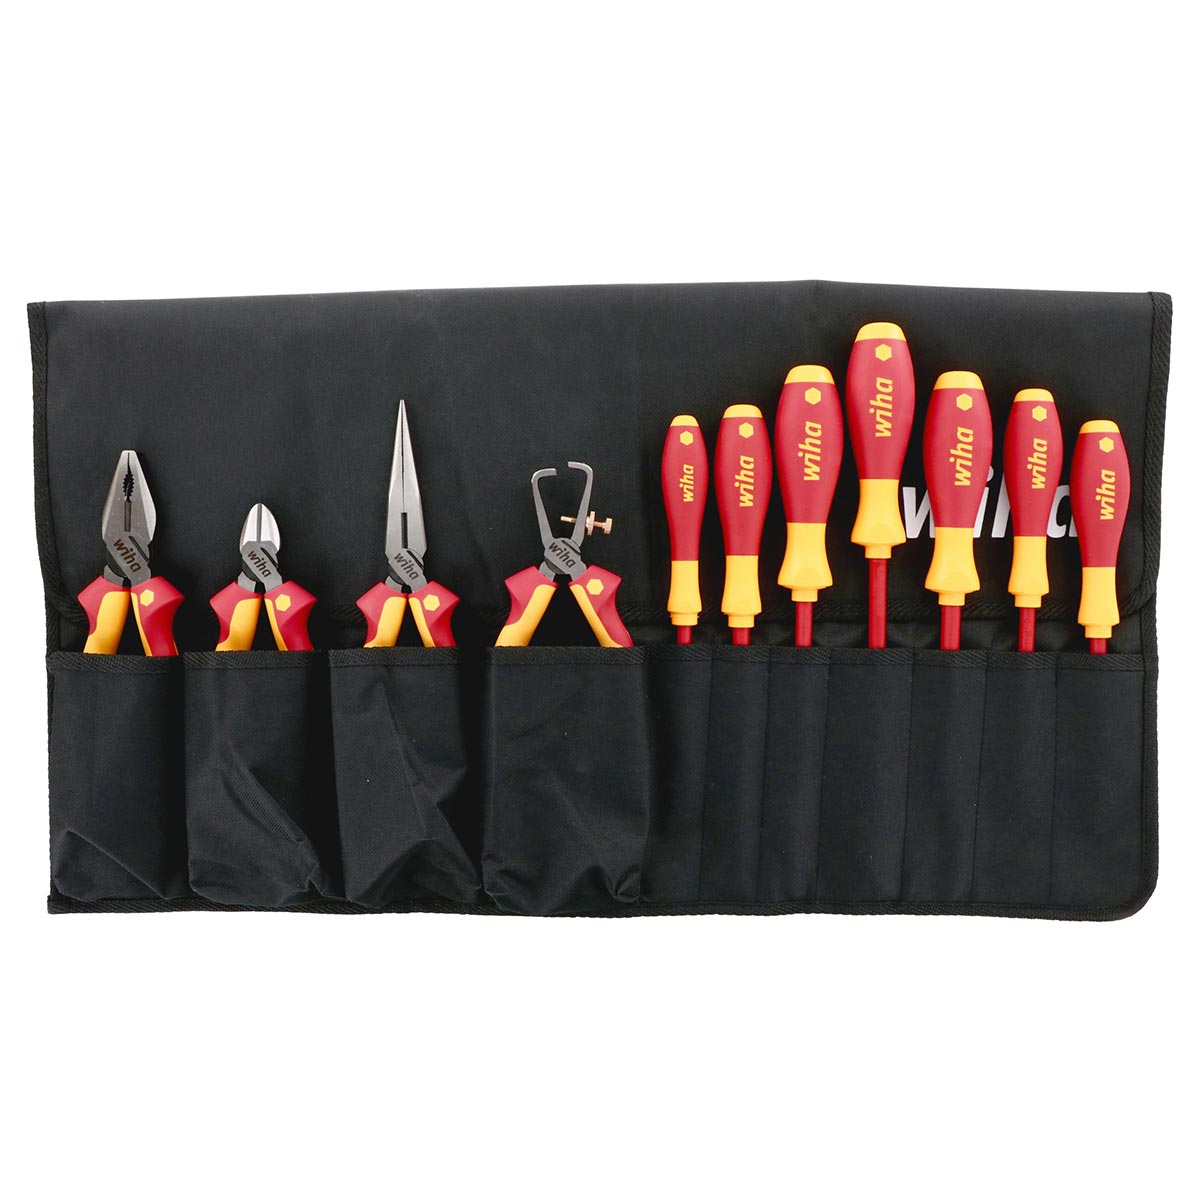 Wiha 32986 Insulated Industrial Pliers and Screwdriver Set - 11 Piece Set